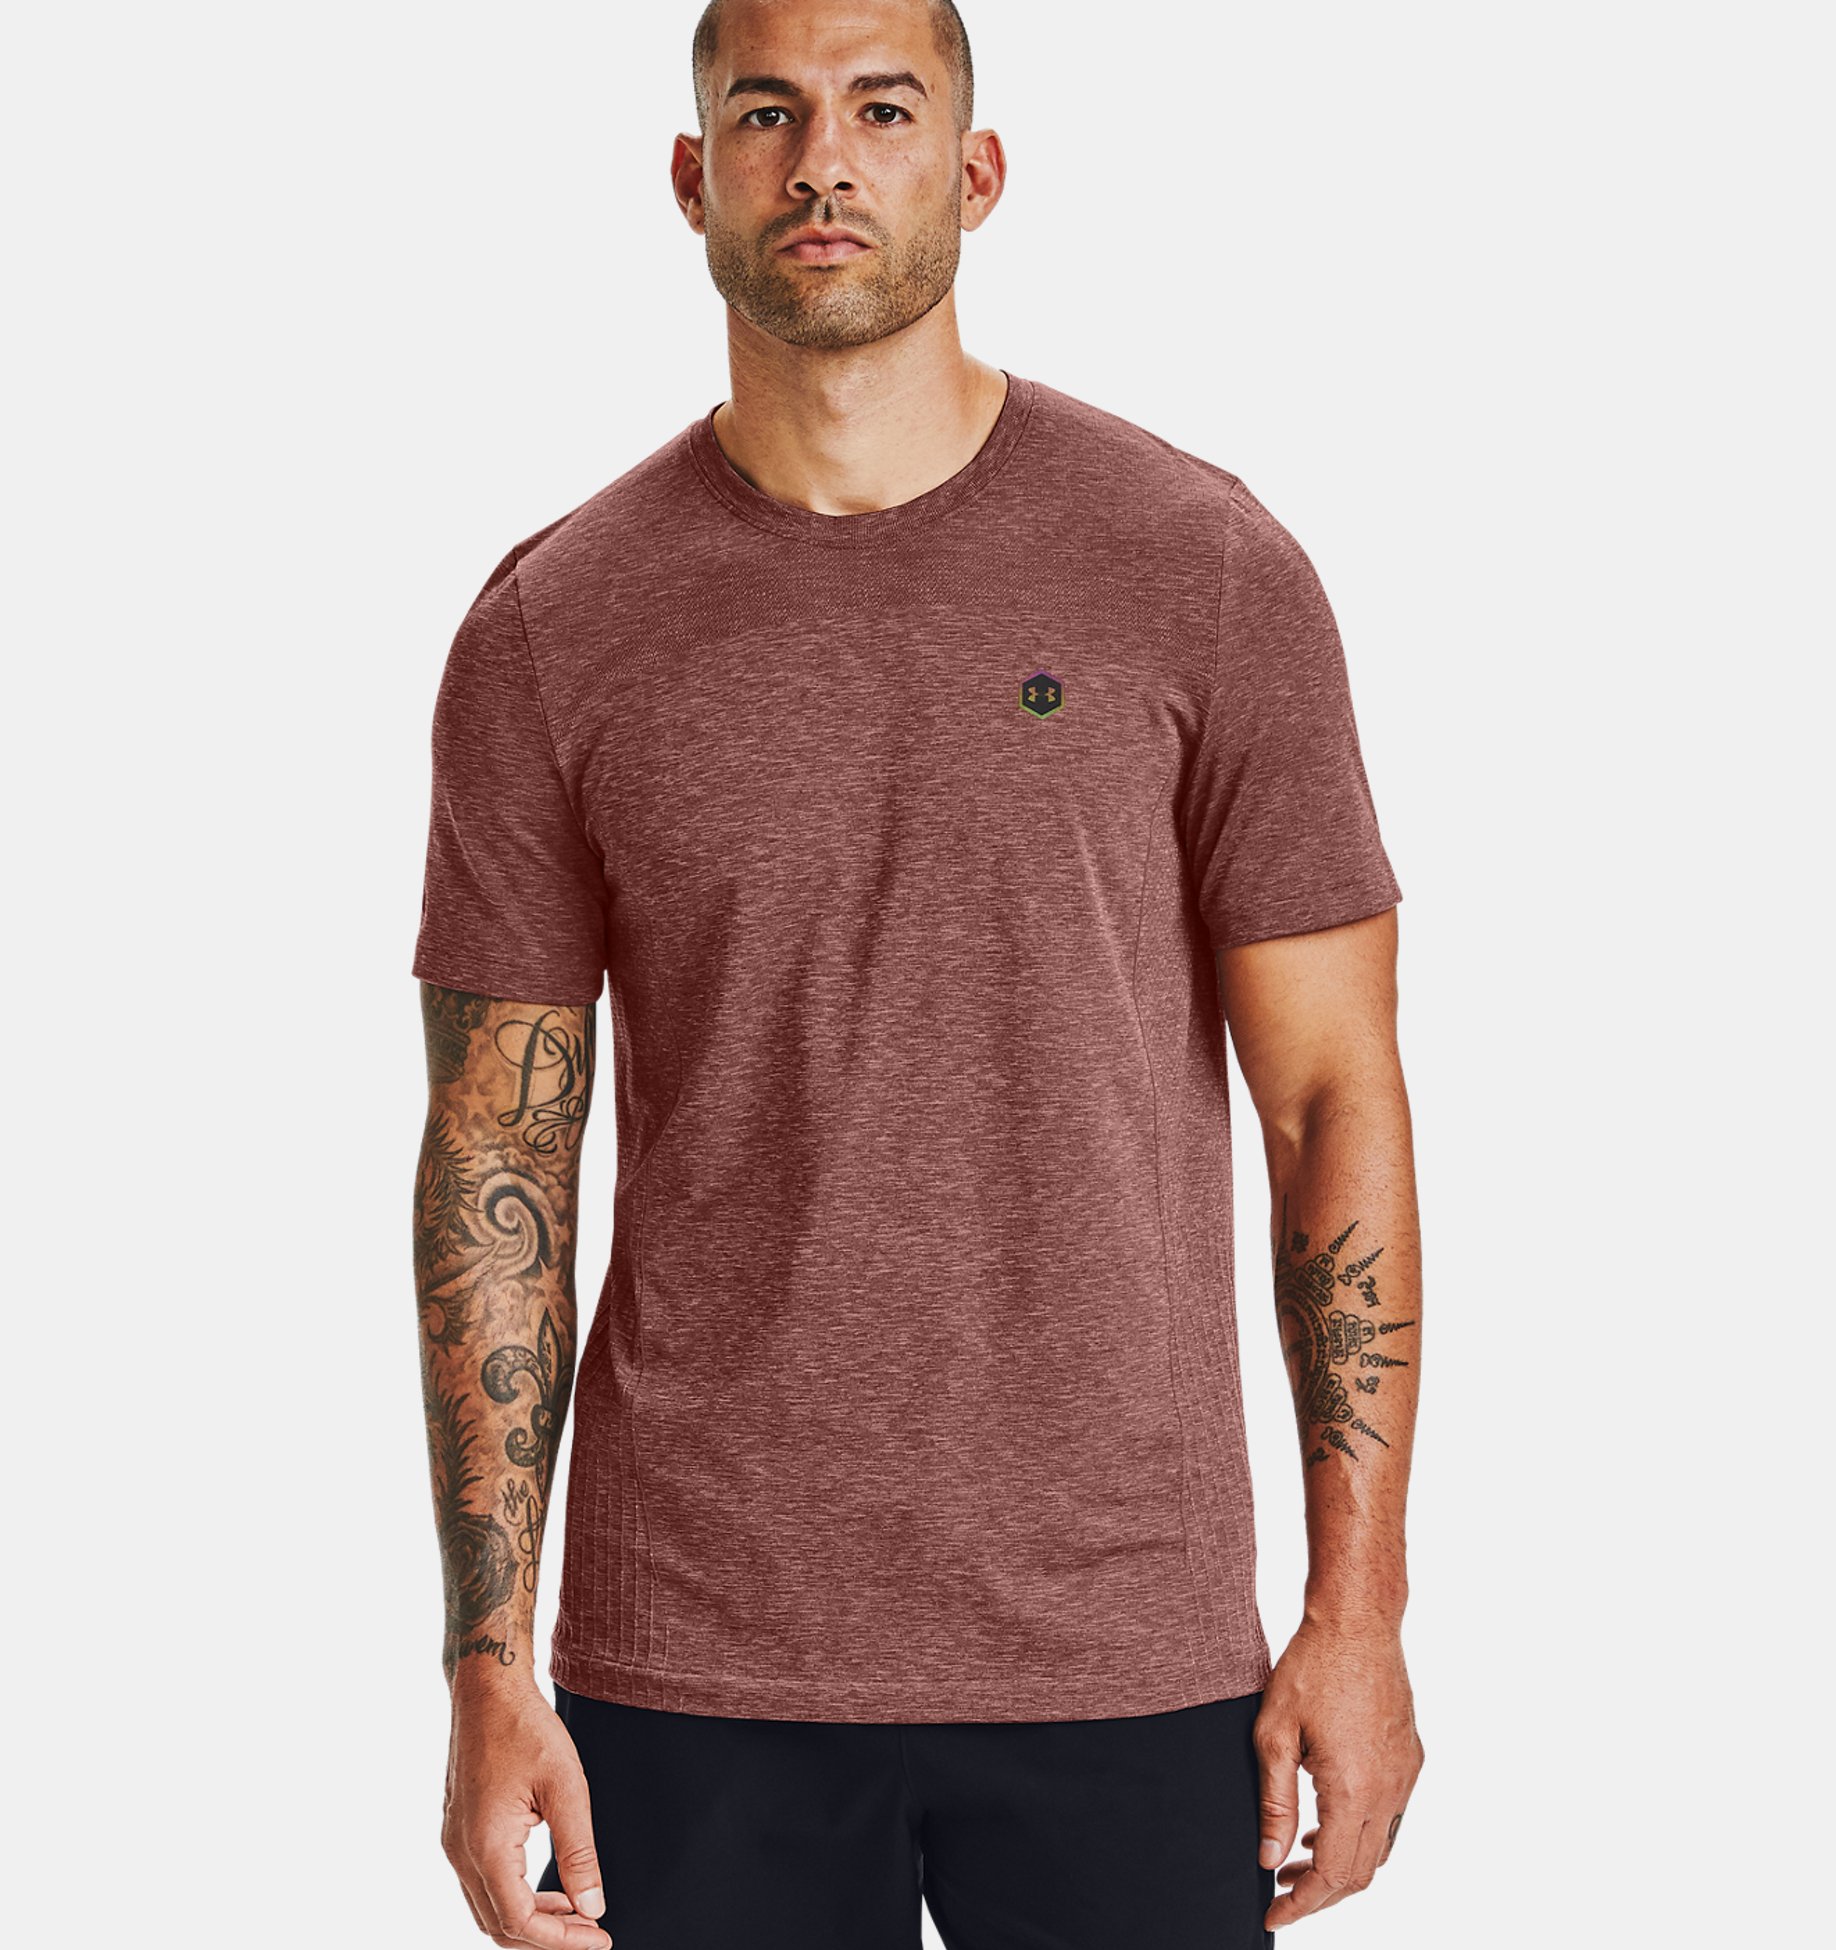 Grey Under Armour UA Men's Athlete Recovery Short Sleeve T-Shirt New 